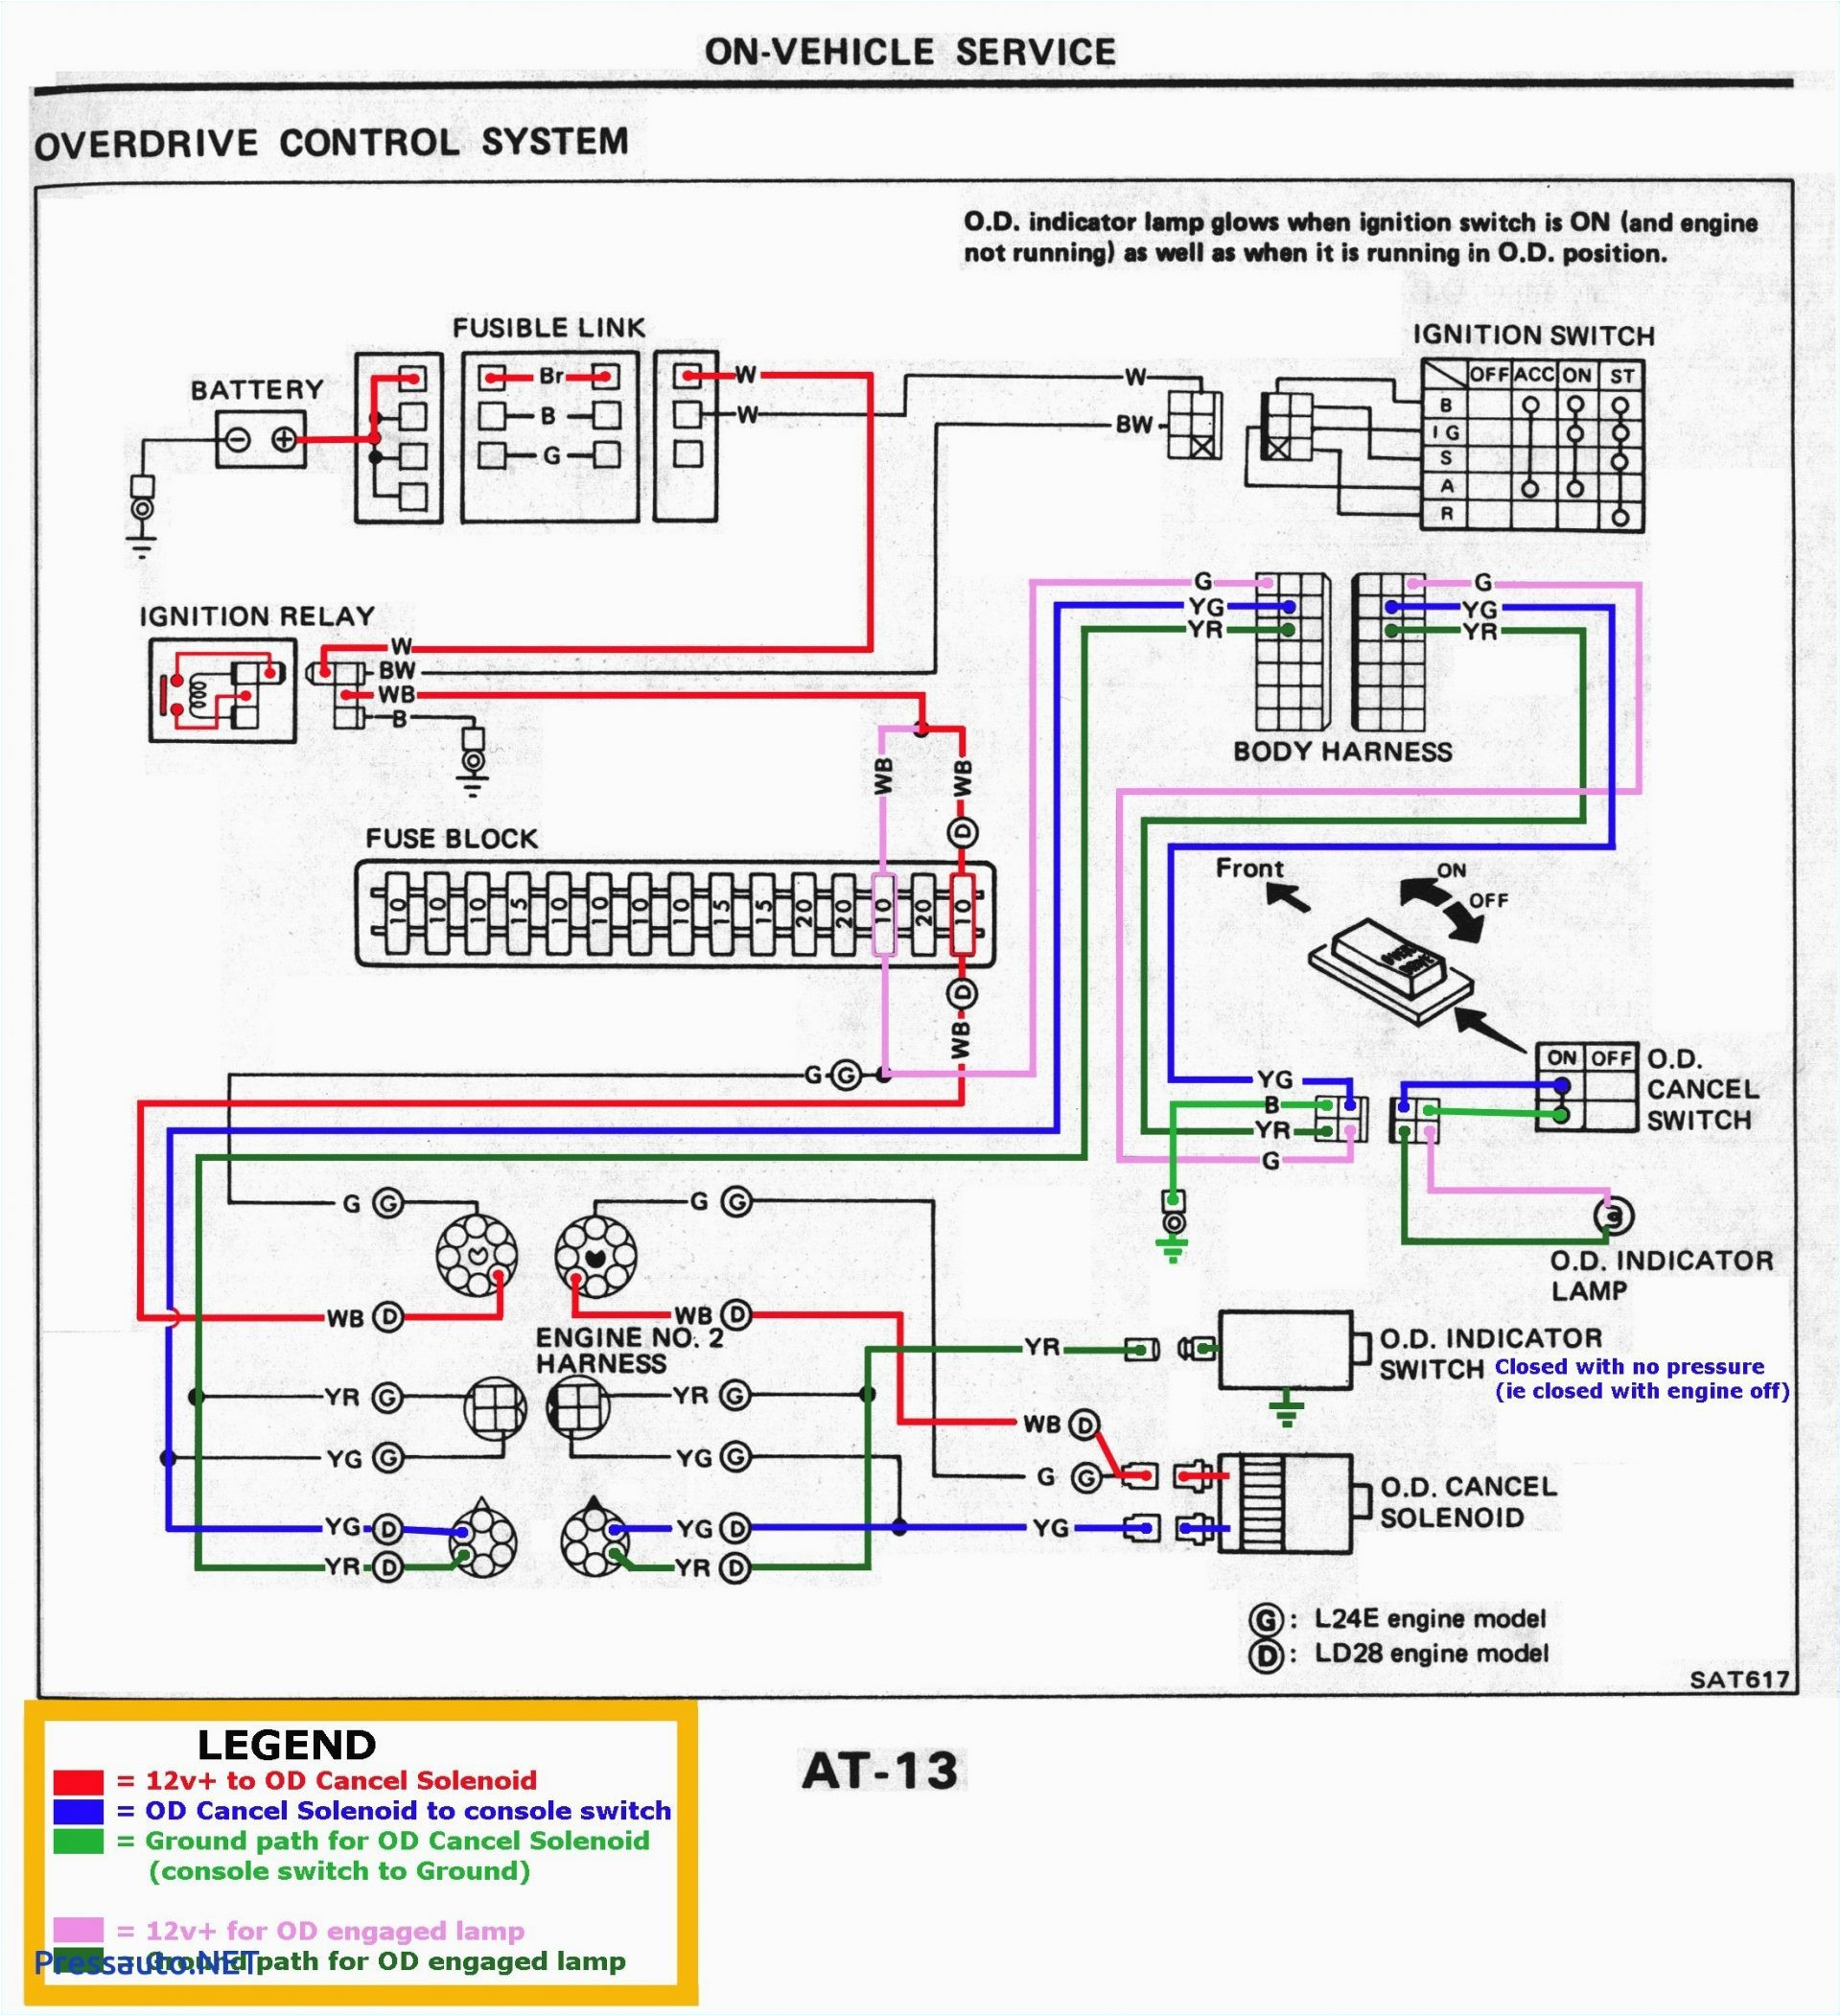 found a cool article on 2008 wire harness schematic changes ls1tech